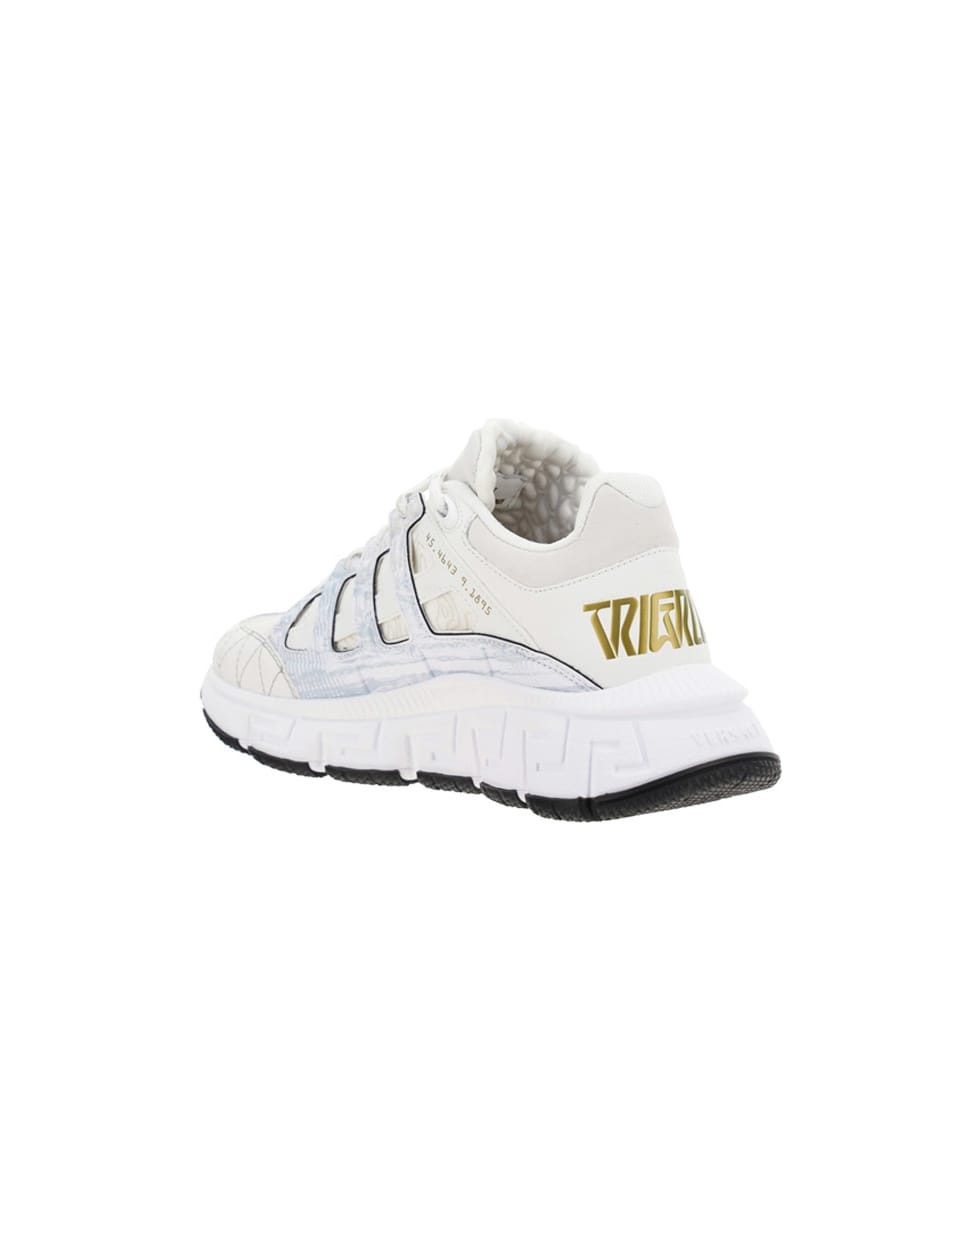 Versace Gianni Versace Sneakers - White+gold